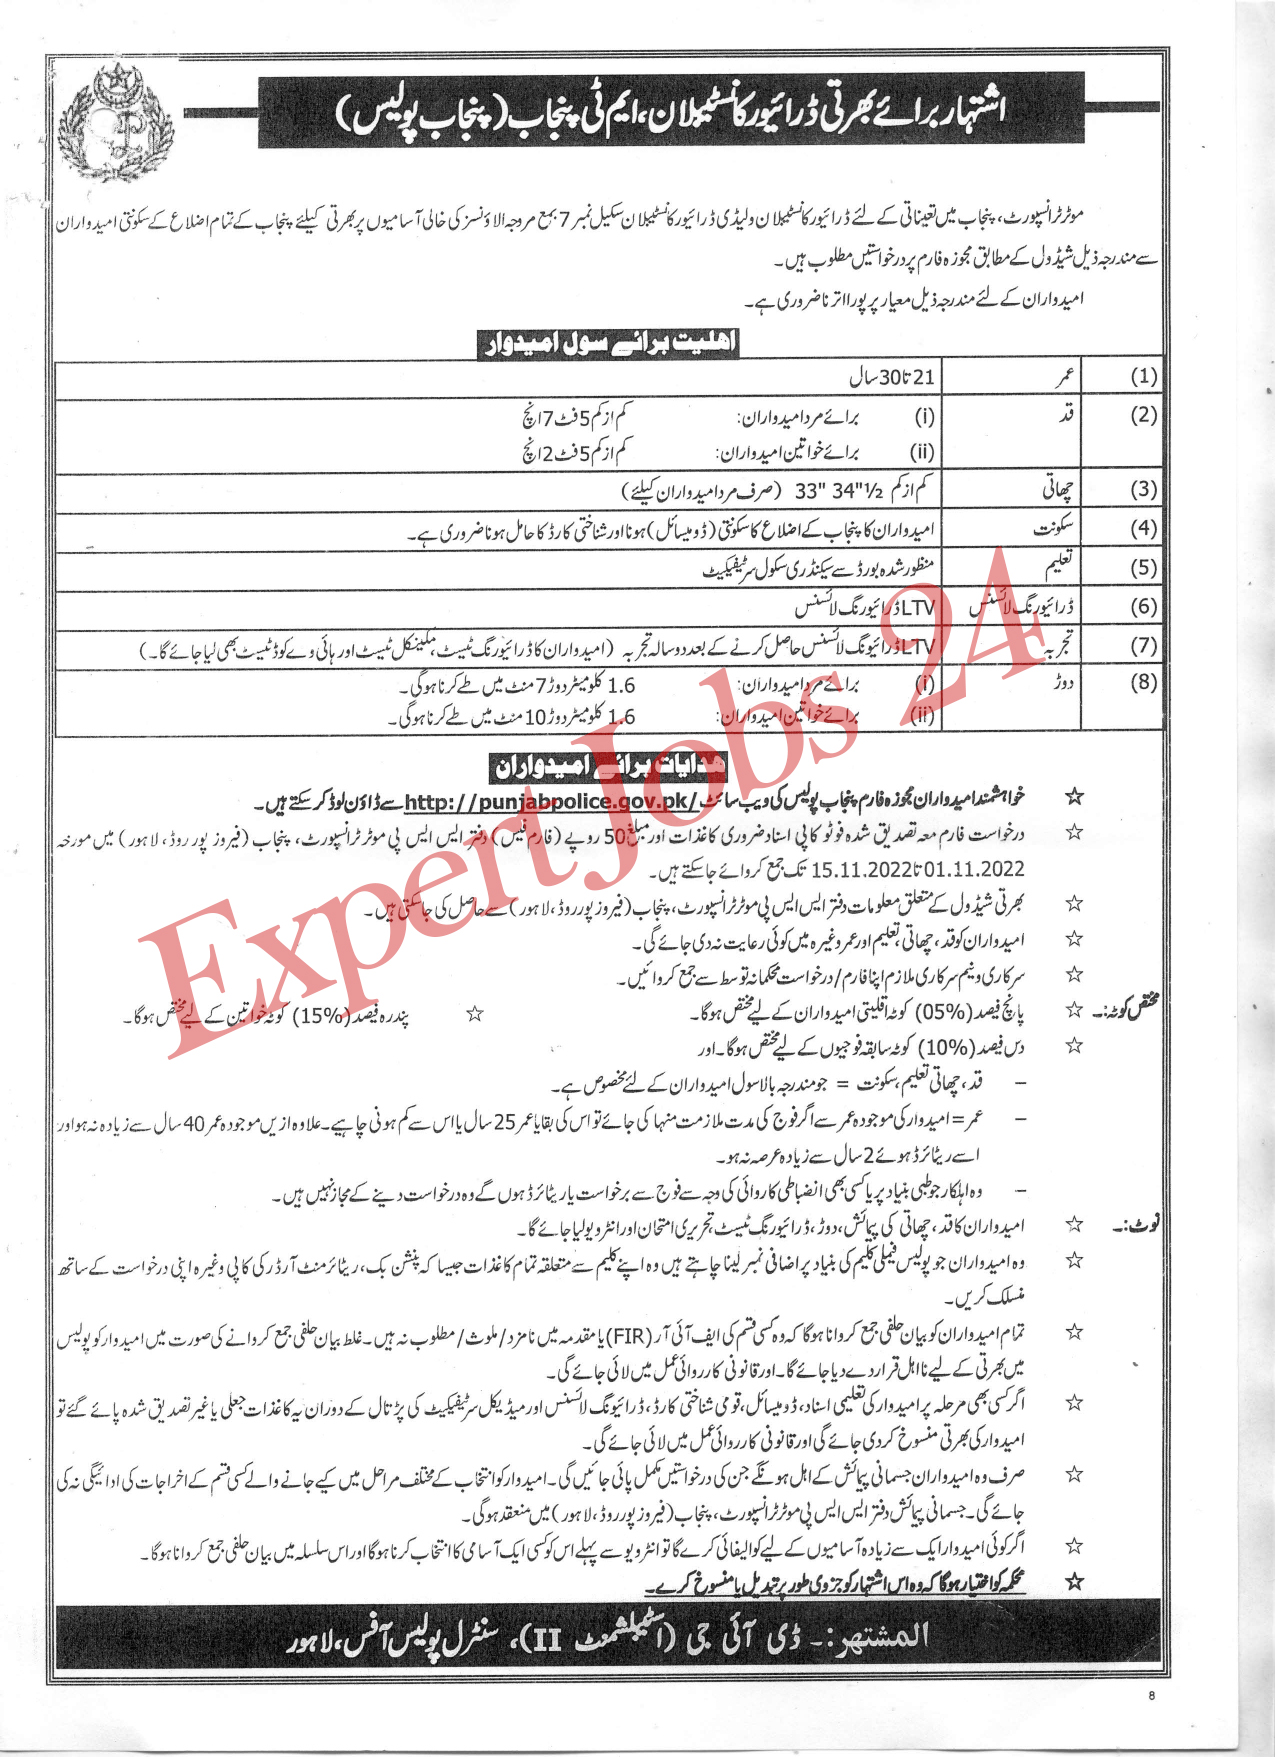 How to Apply For Punjab Police Jobs